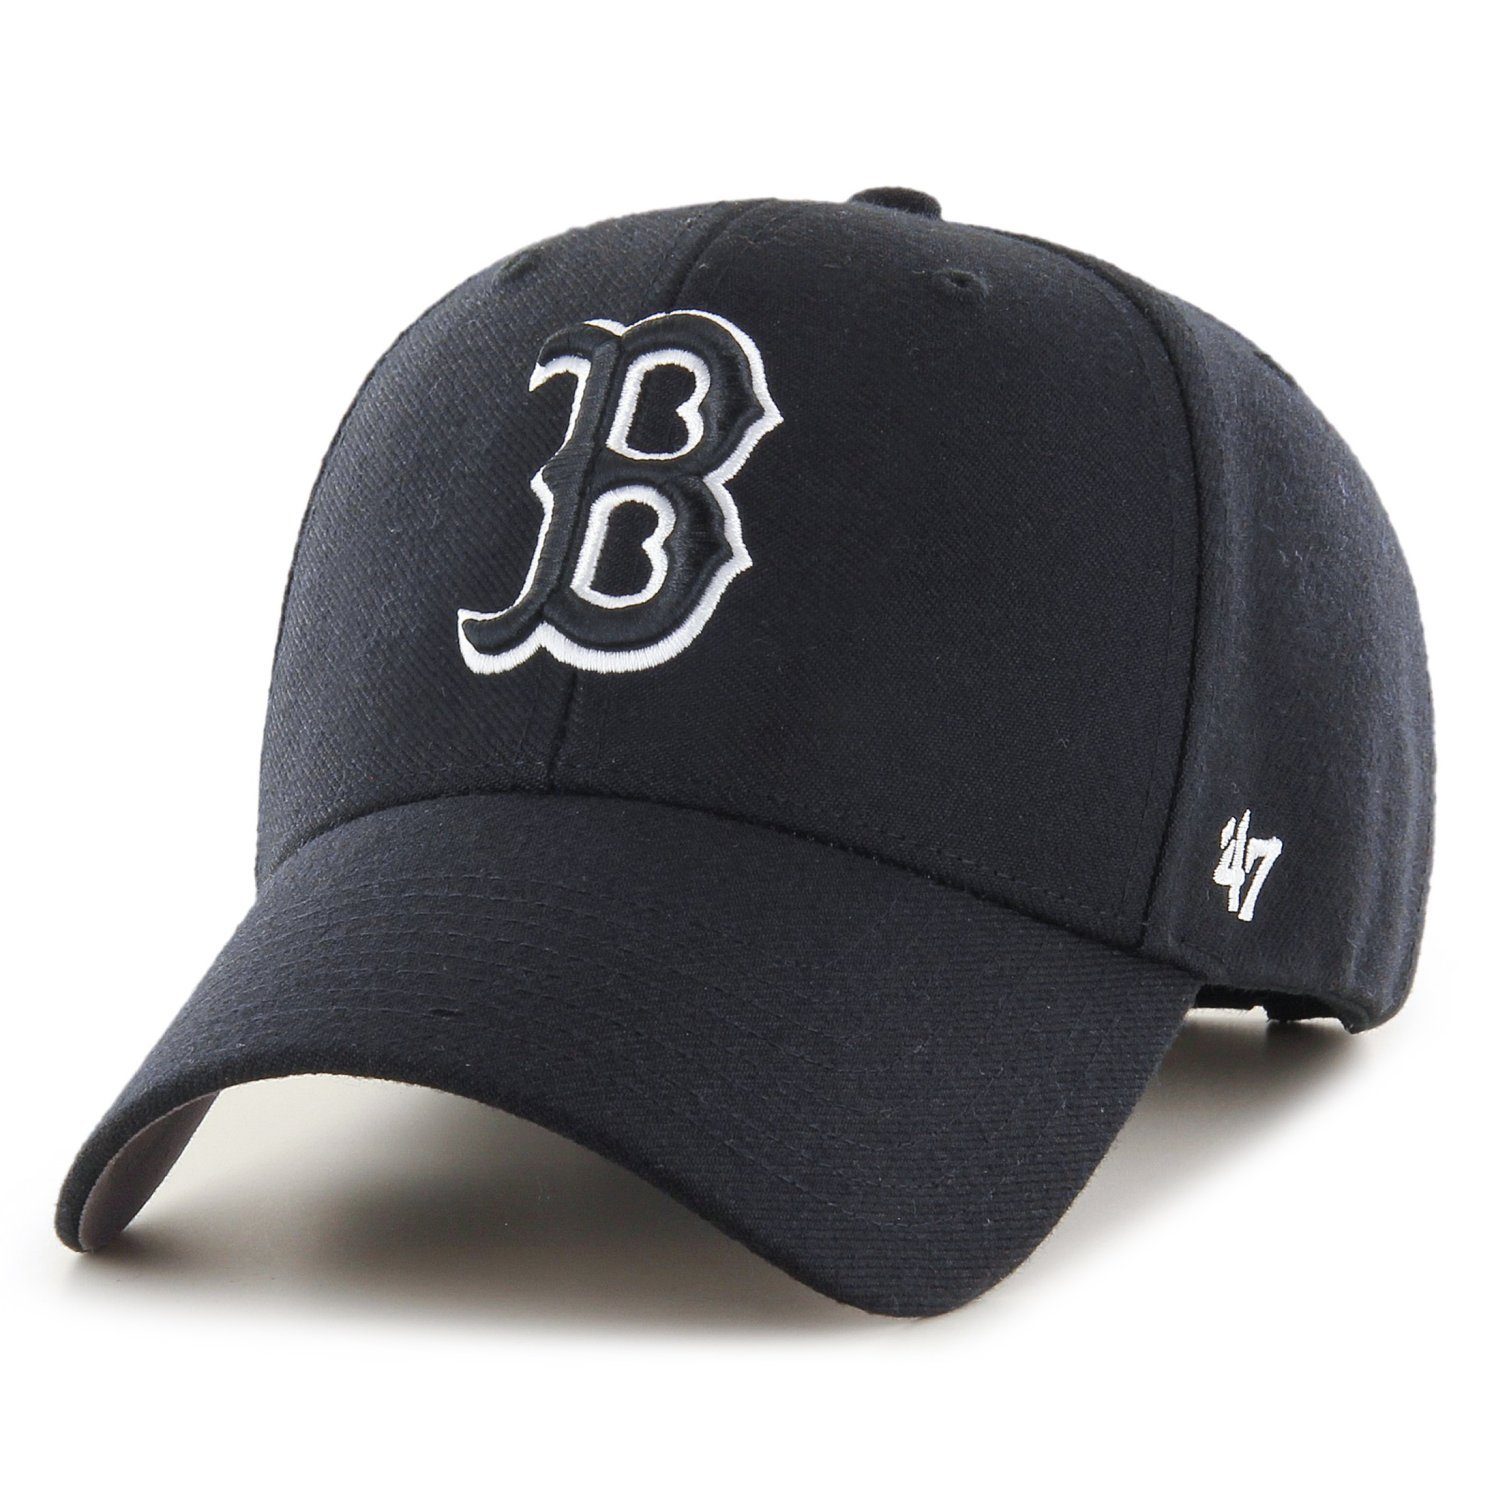 '47 Brand Trucker Cap Relaxed Fit MLB Boston Red Sox